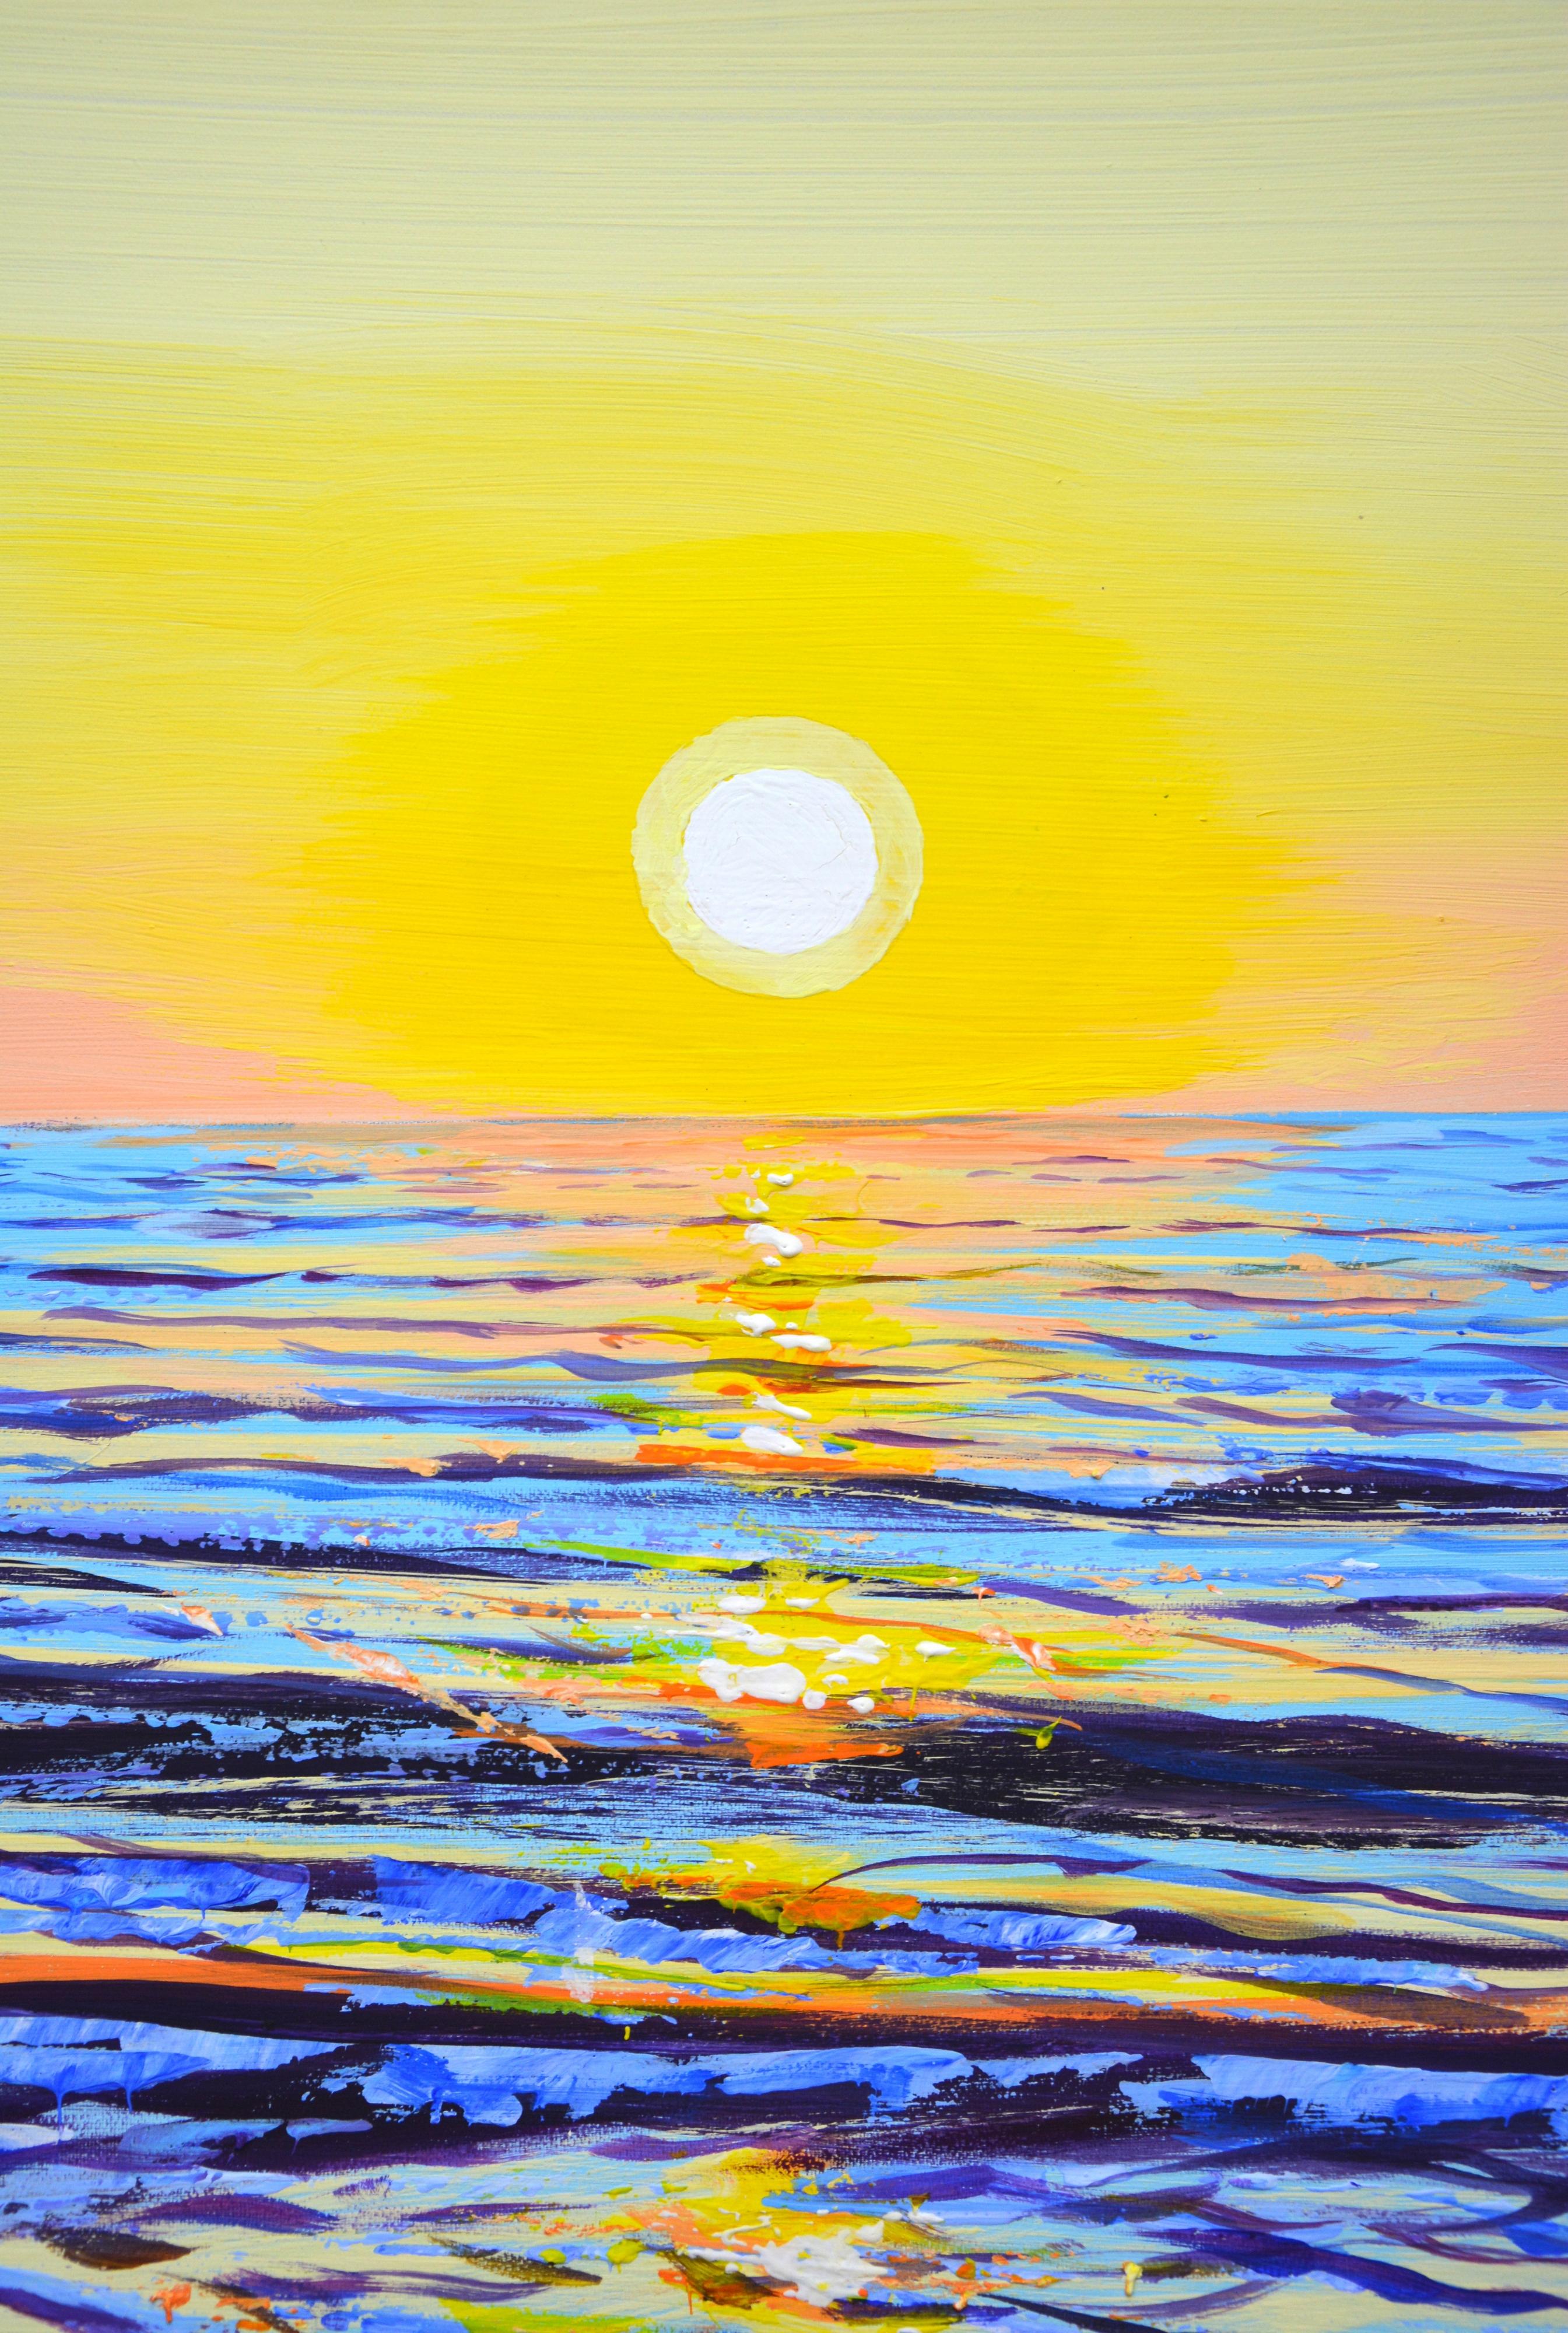 Ocean. Sunset 16. Seascape: summer,
sunset, warm water, ocean, sea, sand, small waves, sun reflection, golden light, sky, shimmering reflections on the water create an atmosphere of relaxation and romance. Made in the style of realism,